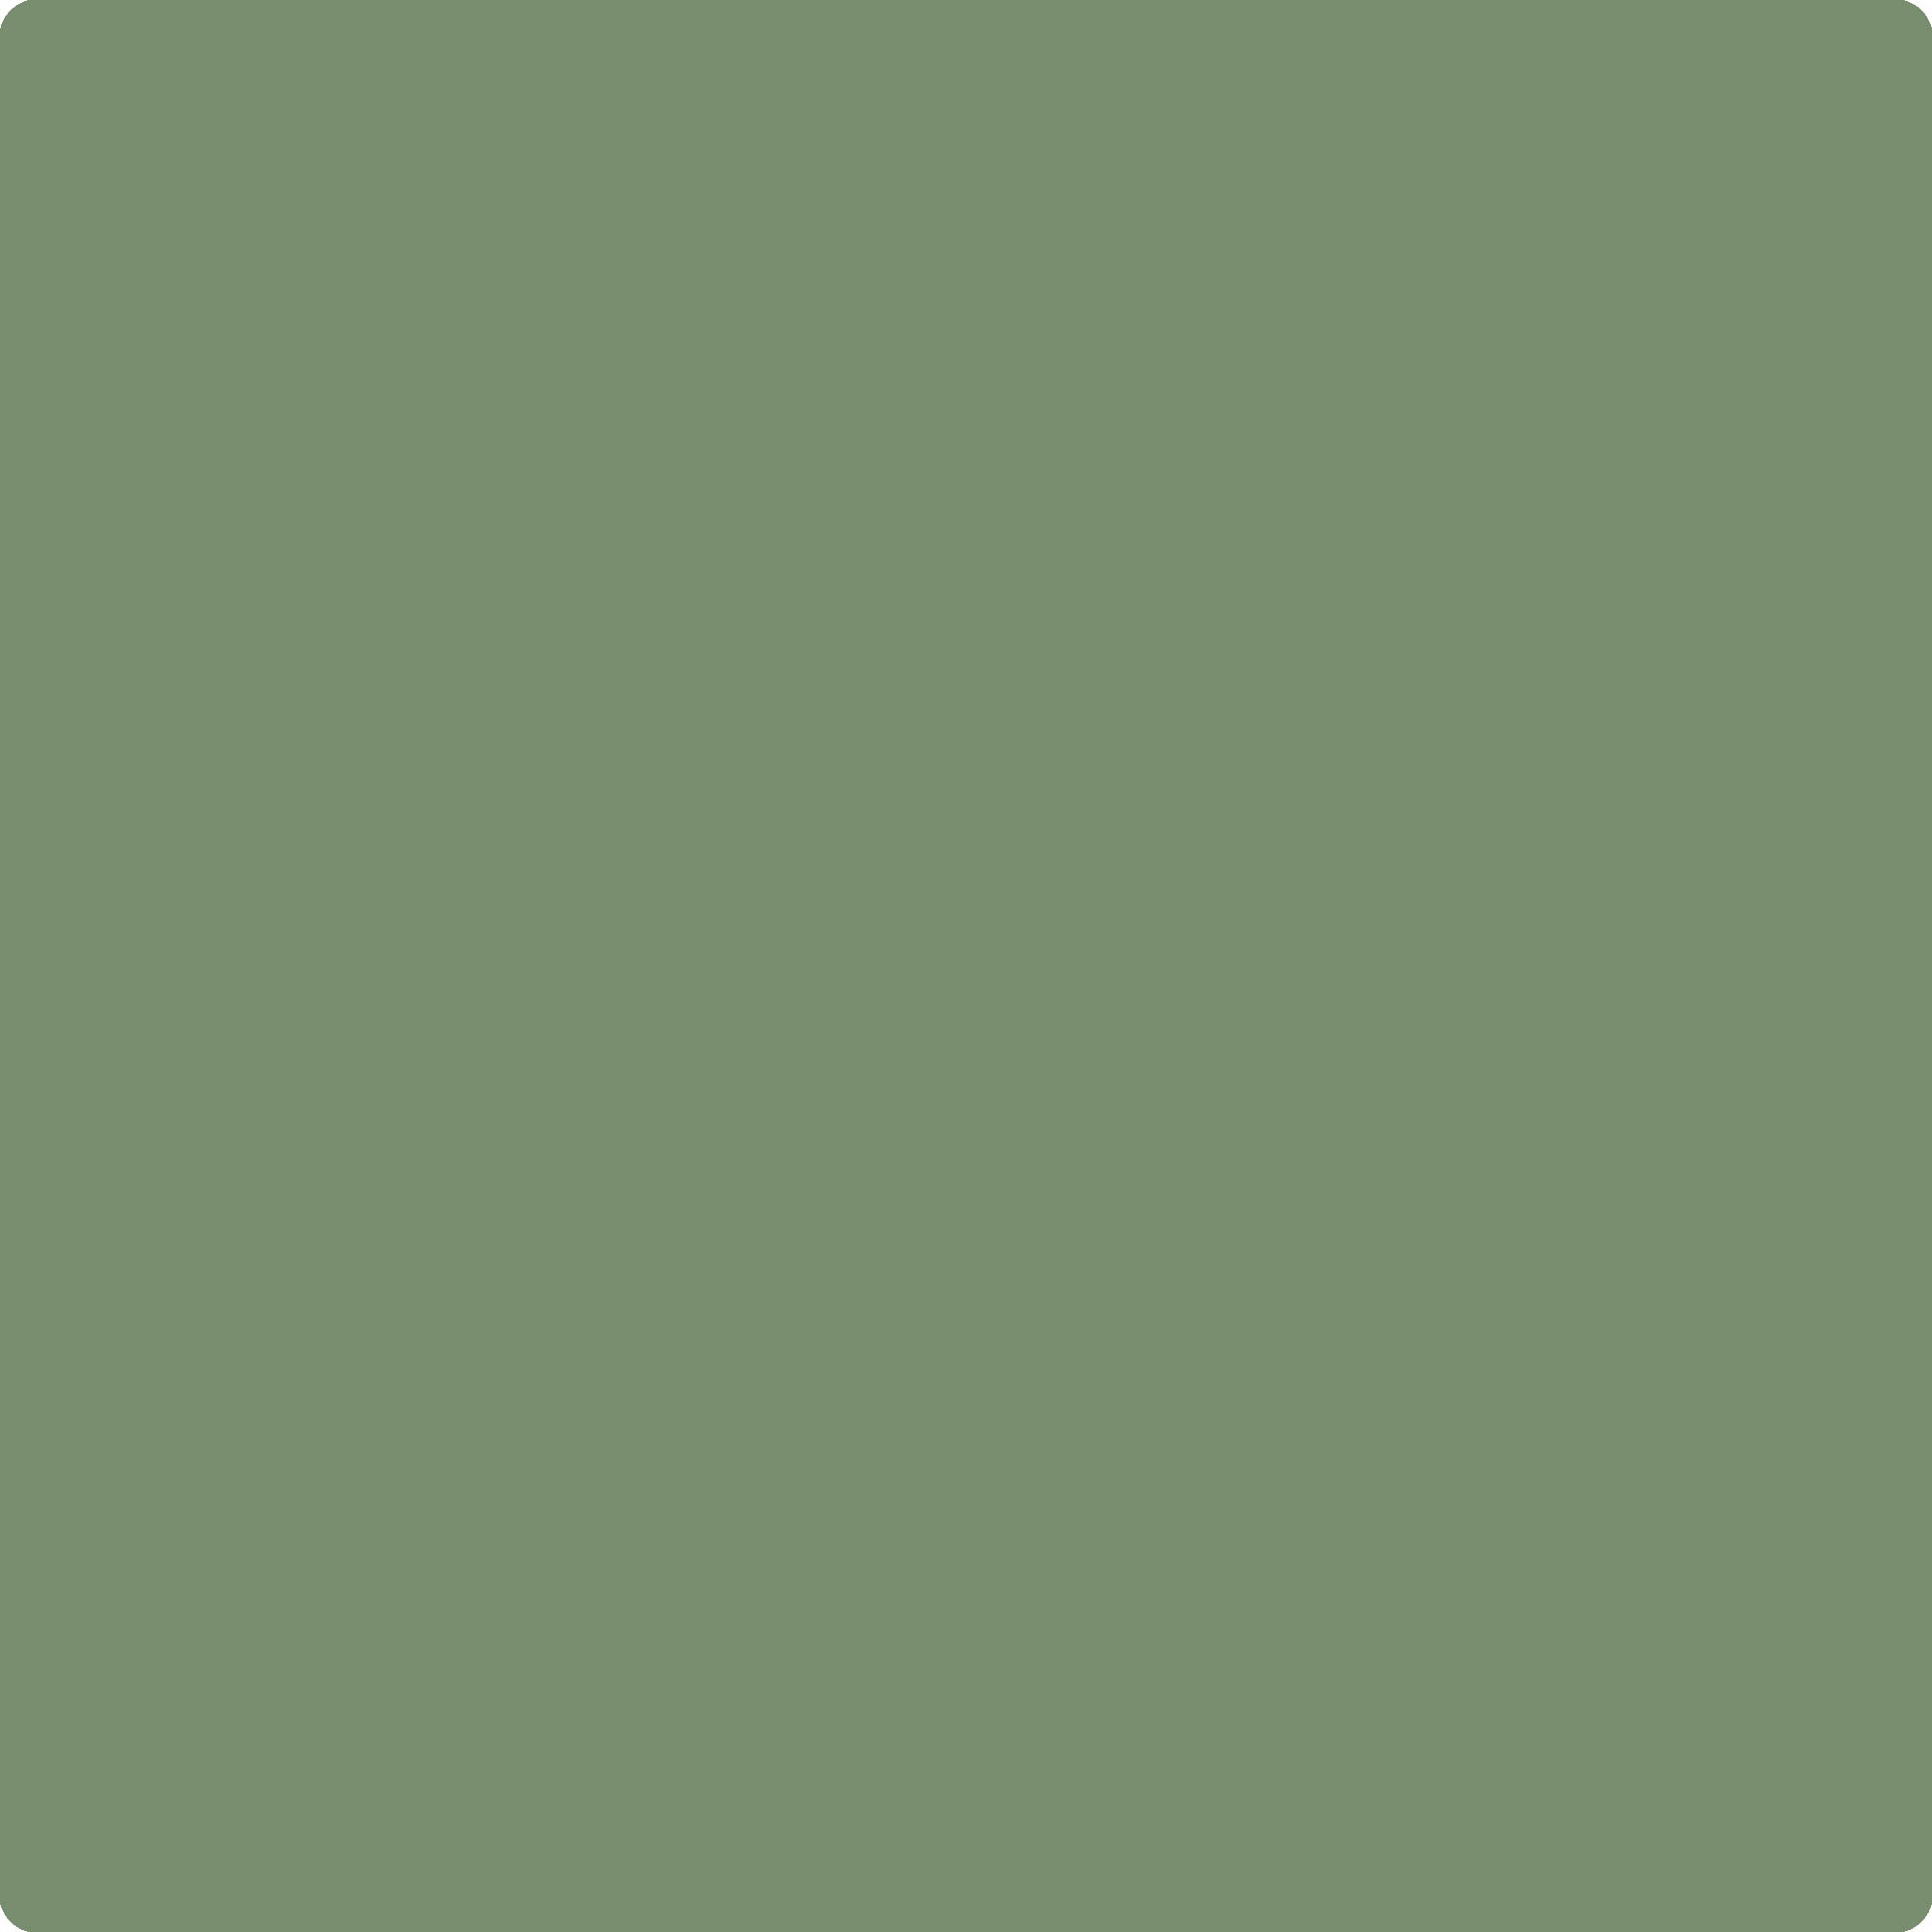 Magnolia Green, Magnolia Home Paint | Available at Hirshfield's